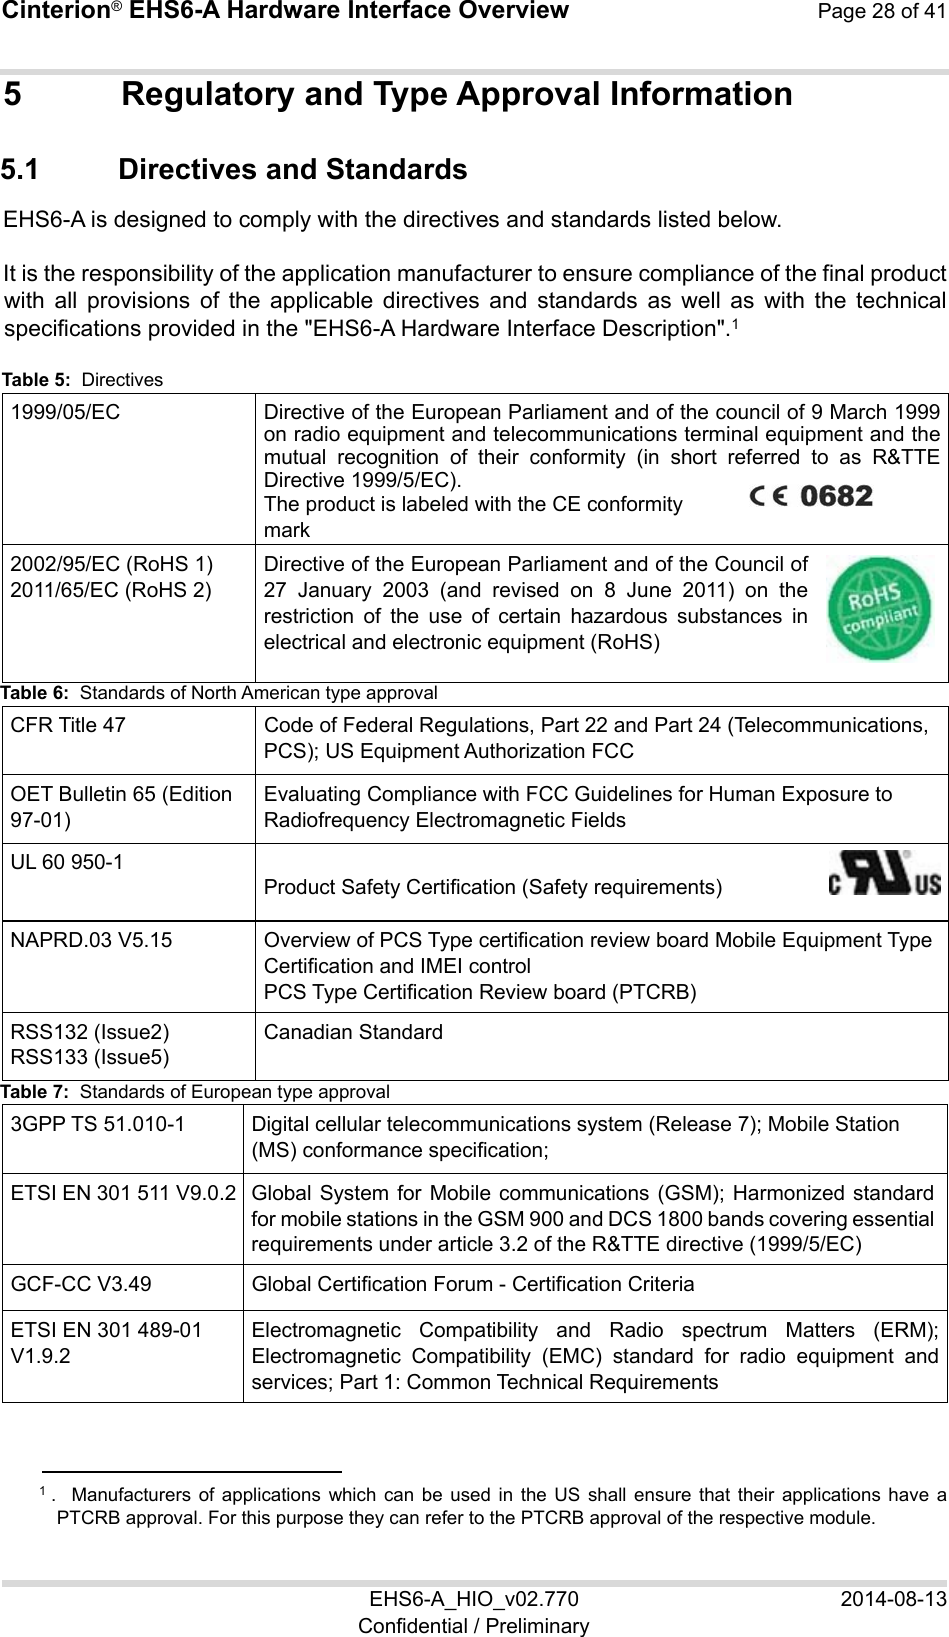 Cinterion® EHS6-A Hardware Interface Overview  Page 28 of 41 EHS6-A_HIO_v02.770  2014-08-13 Confidential / Preliminary 5  Regulatory and Type Approval Information 5.1  Directives and Standards EHS6-A is designed to comply with the directives and standards listed below. It is the responsibility of the application manufacturer to ensure compliance of the final product with  all  provisions  of  the  applicable  directives  and  standards  as  well  as  with  the  technical specifications provided in the &quot;EHS6-A Hardware Interface Description&quot;.1 Table 5:  Directives 1999/05/EC Directive of the European Parliament and of the council of 9 March 1999 on radio equipment and telecommunications terminal equipment and the mutual  recognition  of  their  conformity  (in  short  referred  to  as  R&amp;TTE Directive 1999/5/EC). The product is labeled with the CE conformity mark  2002/95/EC (RoHS 1) 2011/65/EC (RoHS 2) Directive of the European Parliament and of the Council of 27  January  2003  (and  revised  on  8  June  2011)  on  the restriction  of  the  use  of  certain  hazardous  substances  in electrical and electronic equipment (RoHS) Table 6:  Standards of North American type approval CFR Title 47 Code of Federal Regulations, Part 22 and Part 24 (Telecommunications, PCS); US Equipment Authorization FCC OET Bulletin 65 (Edition 97-01)  Evaluating Compliance with FCC Guidelines for Human Exposure to Radiofrequency Electromagnetic Fields UL 60 950-1 Product Safety Certification (Safety requirements) NAPRD.03 V5.15 Overview of PCS Type certification review board Mobile Equipment Type Certification and IMEI control PCS Type Certification Review board (PTCRB) RSS132 (Issue2) RSS133 (Issue5) Canadian StandardTable 7:  Standards of European type approval 3GPP TS 51.010-1 Digital cellular telecommunications system (Release 7); Mobile Station (MS) conformance specification; ETSI EN 301 511 V9.0.2 Global  System for Mobile communications (GSM); Harmonized standard for mobile stations in the GSM 900 and DCS 1800 bands covering essential requirements under article 3.2 of the R&amp;TTE directive (1999/5/EC) GCF-CC V3.49 Global Certification Forum - Certification CriteriaETSI EN 301 489-01 V1.9.2 Electromagnetic  Compatibility  and  Radio  spectrum  Matters  (ERM); Electromagnetic  Compatibility  (EMC)  standard  for  radio  equipment  and services; Part 1: Common Technical Requirements                                                  1 .    Manufacturers  of  applications  which  can  be  used  in  the  US  shall  ensure  that  their  applications  have  a PTCRB approval. For this purpose they can refer to the PTCRB approval of the respective module.  